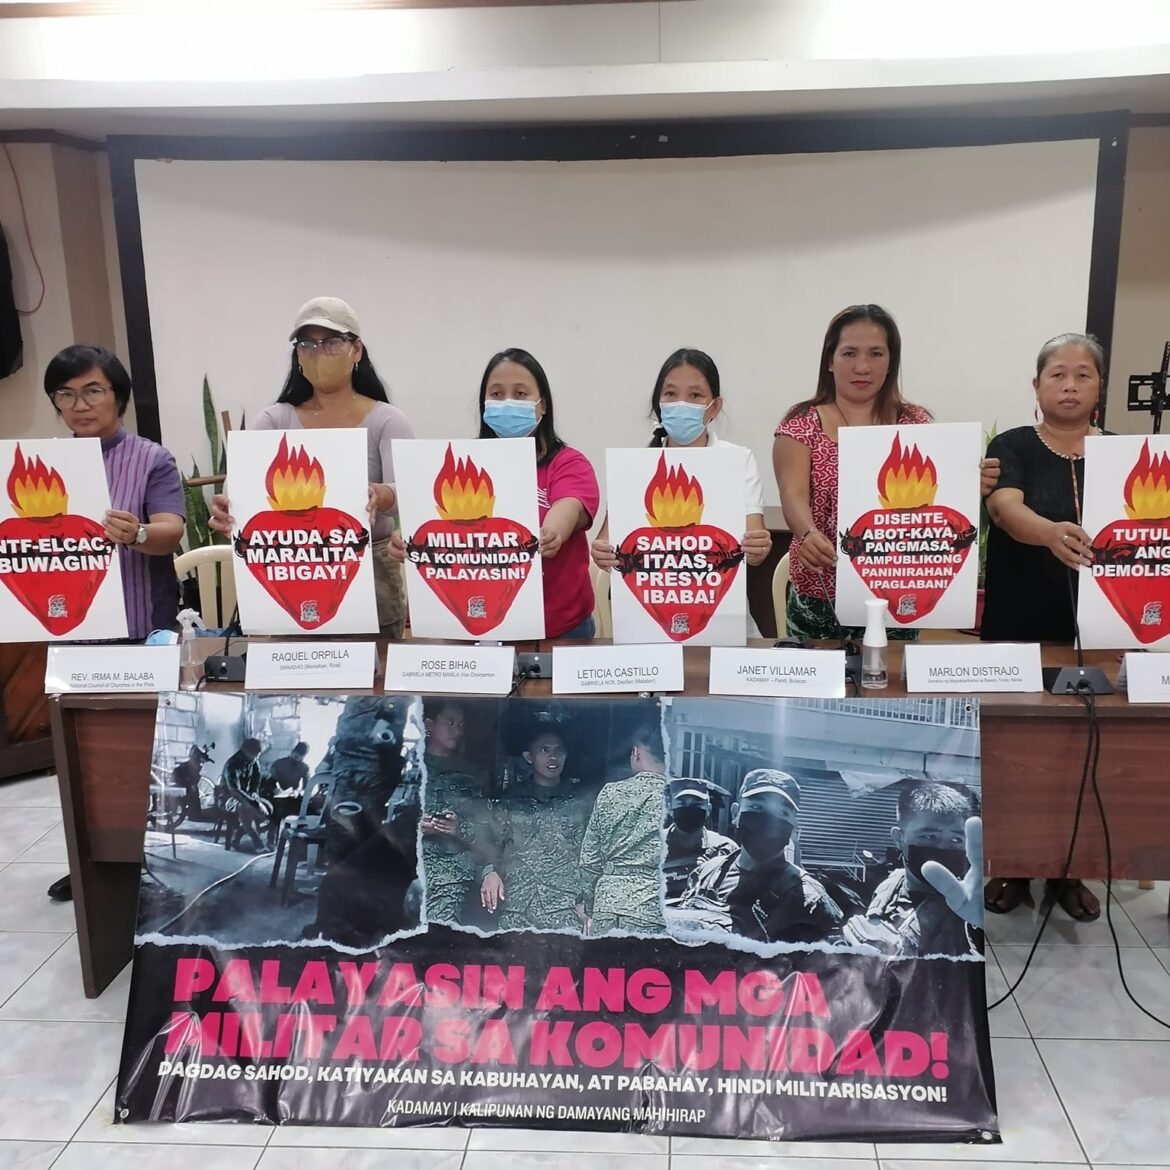 From demolition to militarization: Urban poor communities under siege by state armed forces